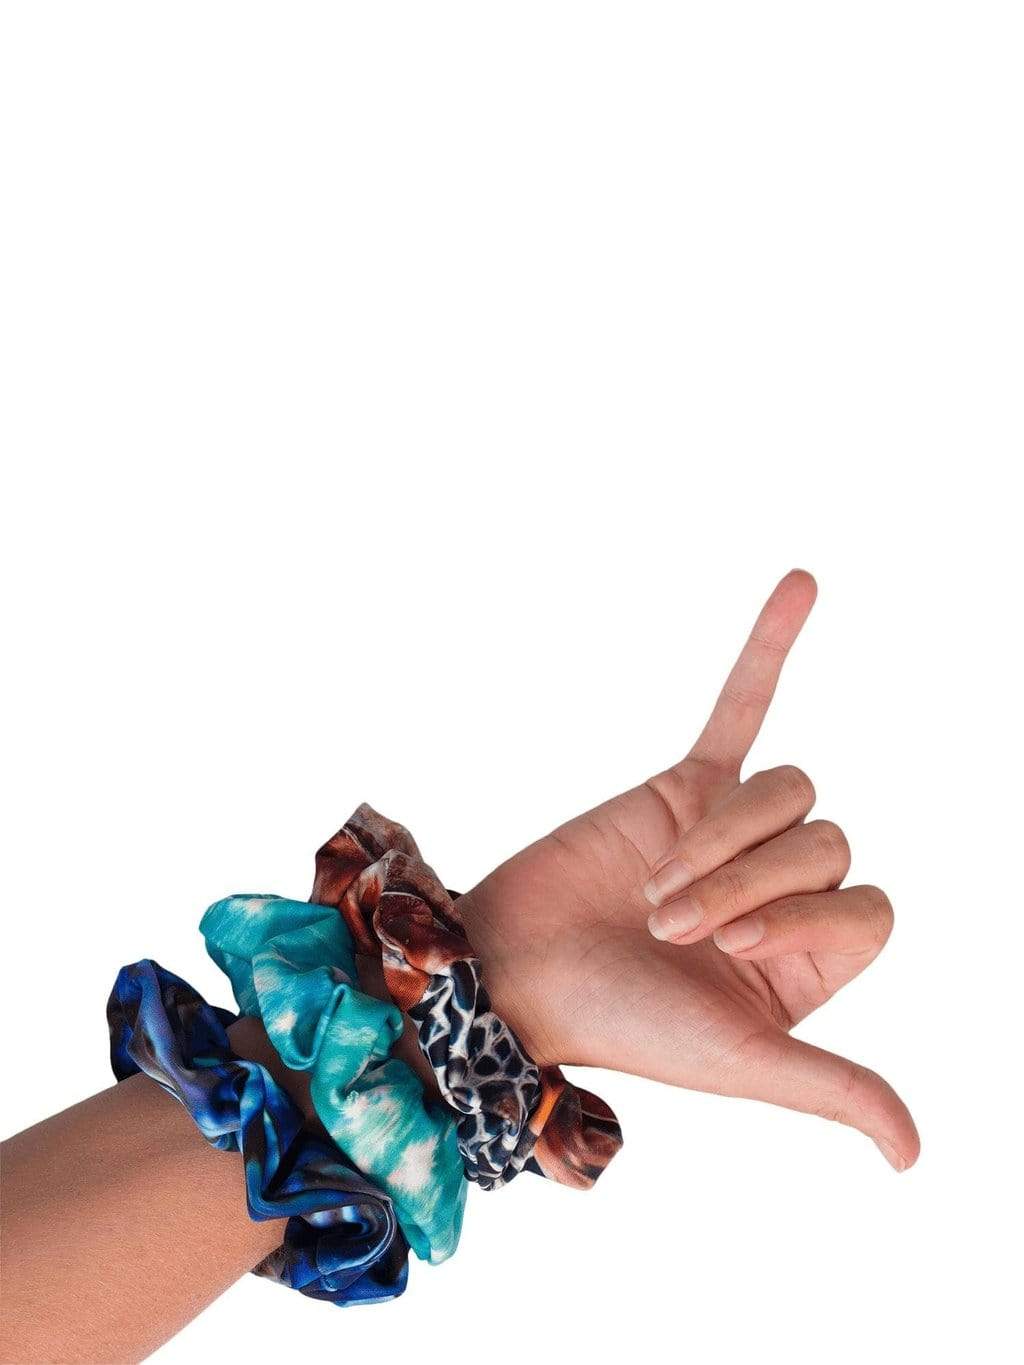 Waterlust Printed Scrunchie Made From Pre-Consumer Waste